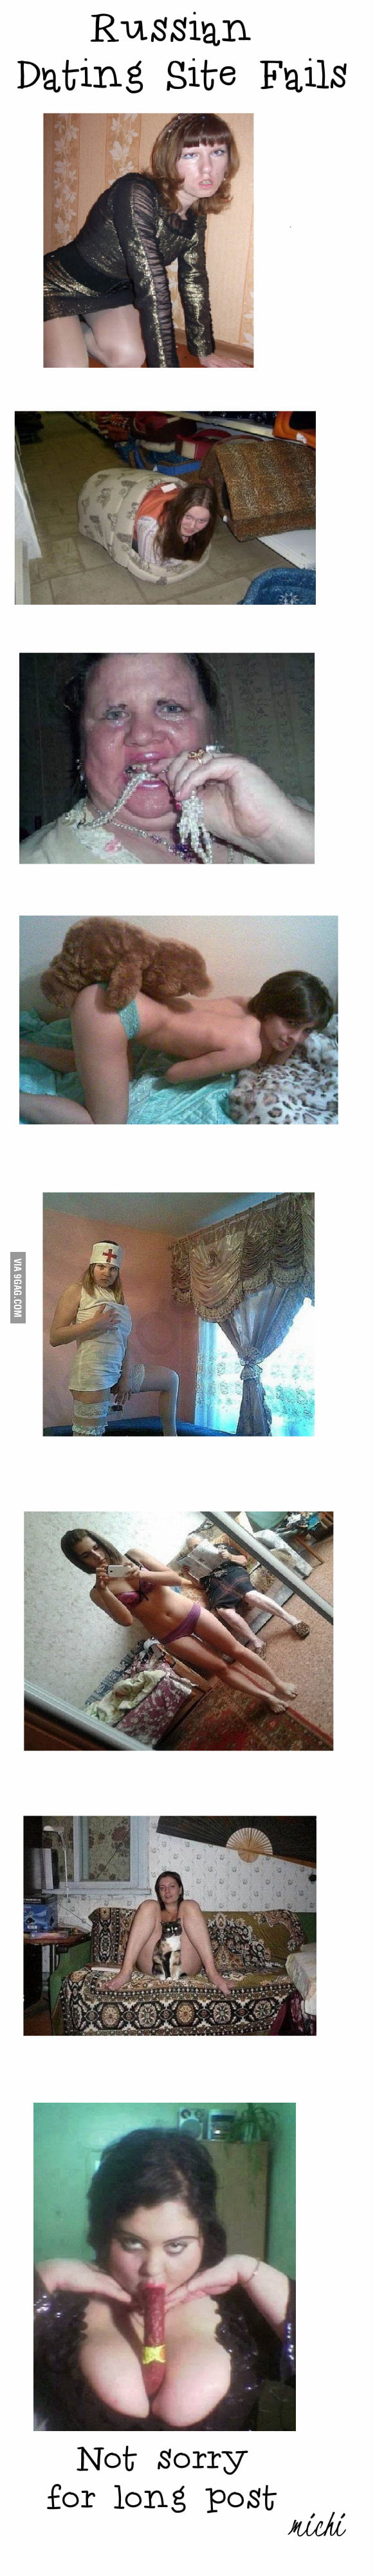 Russian dating pictures 9gag